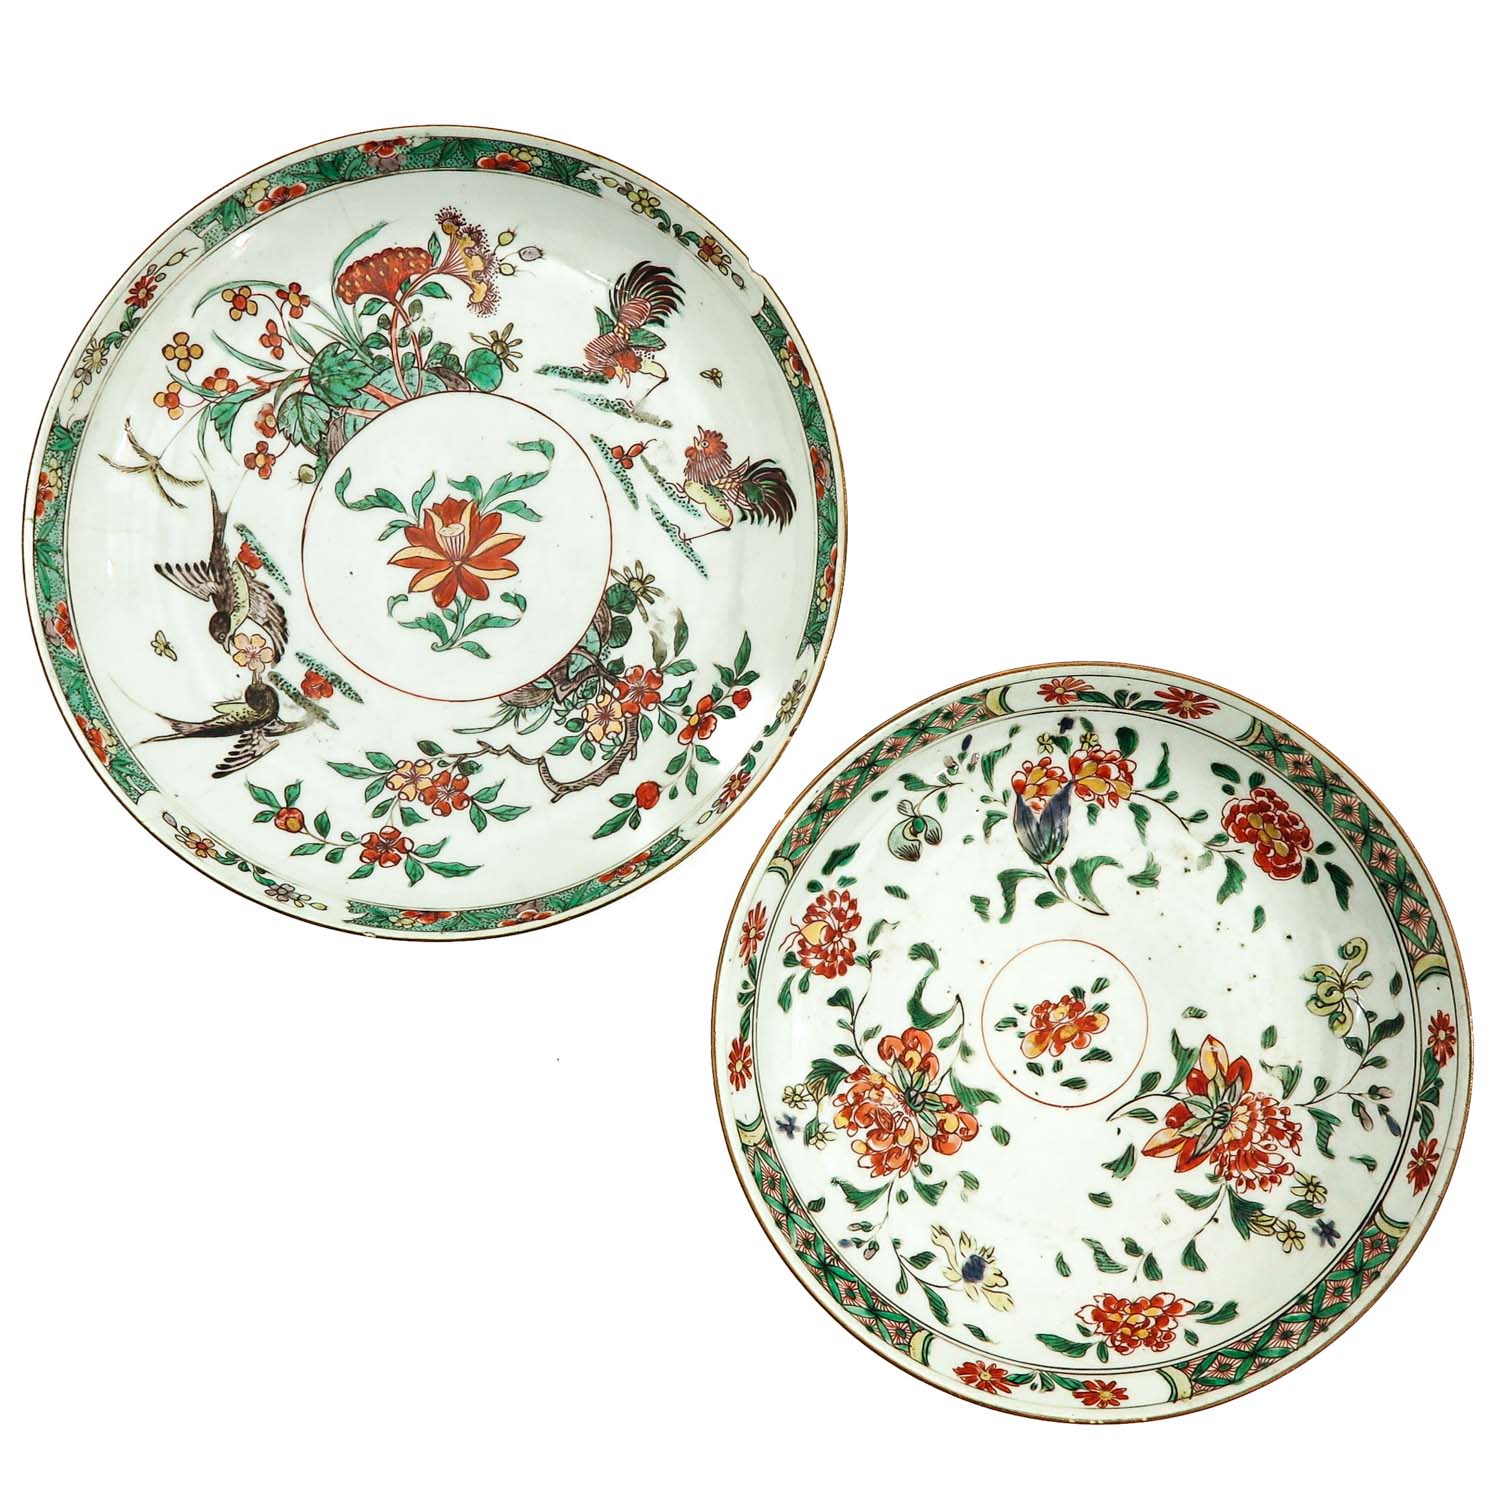 A Lot of 2 Famille Verte Plates